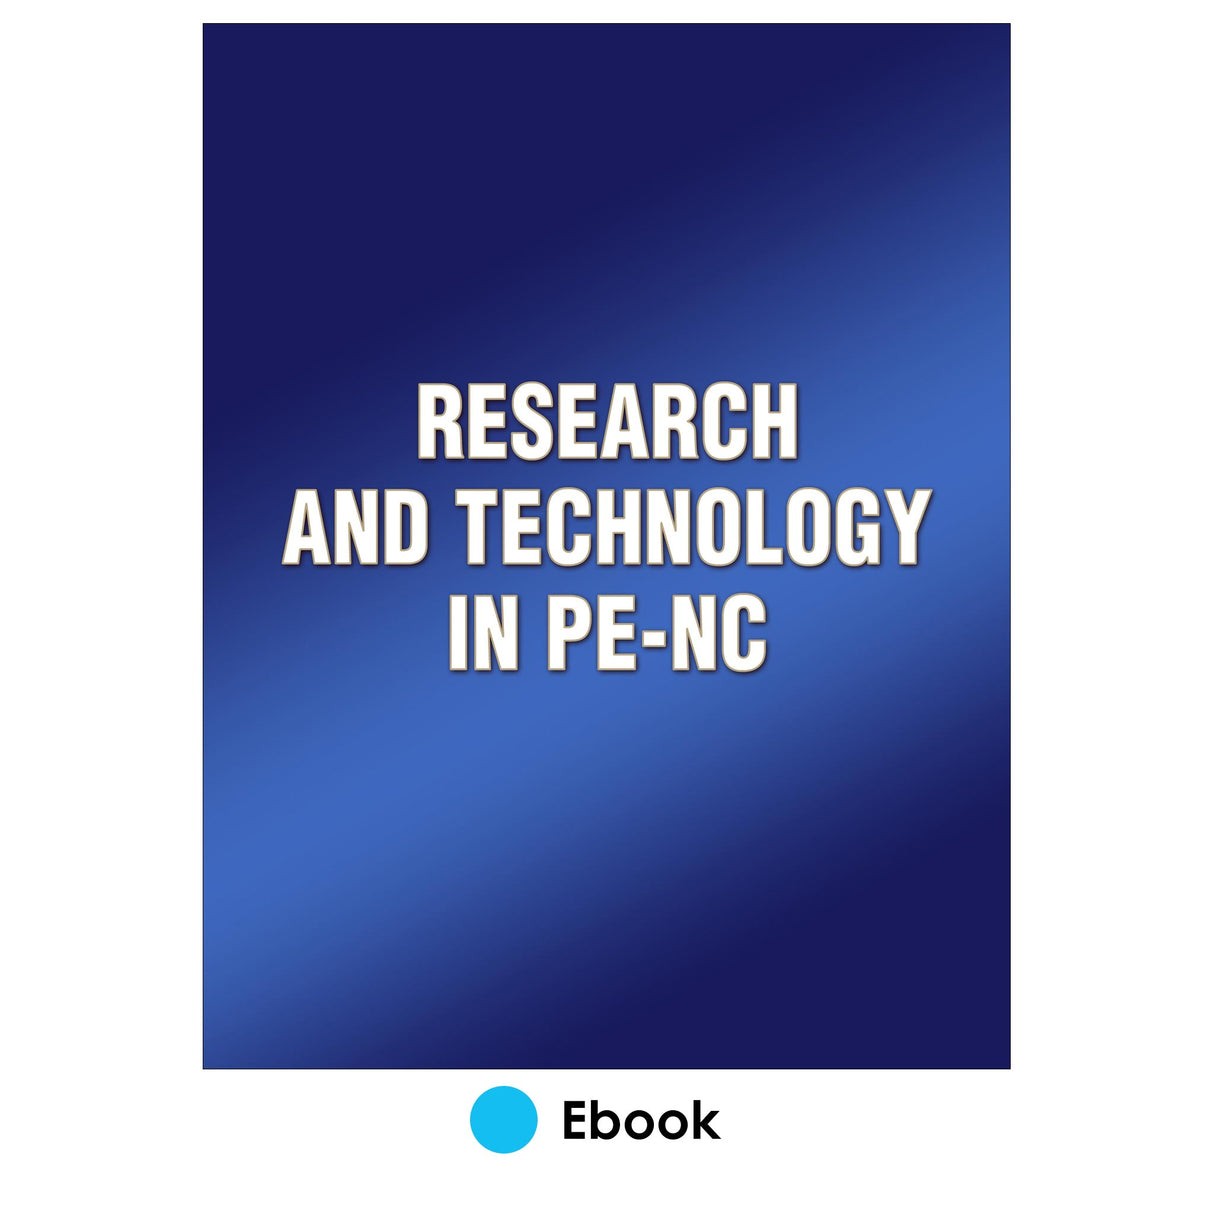 Research and Technology in PE-NC